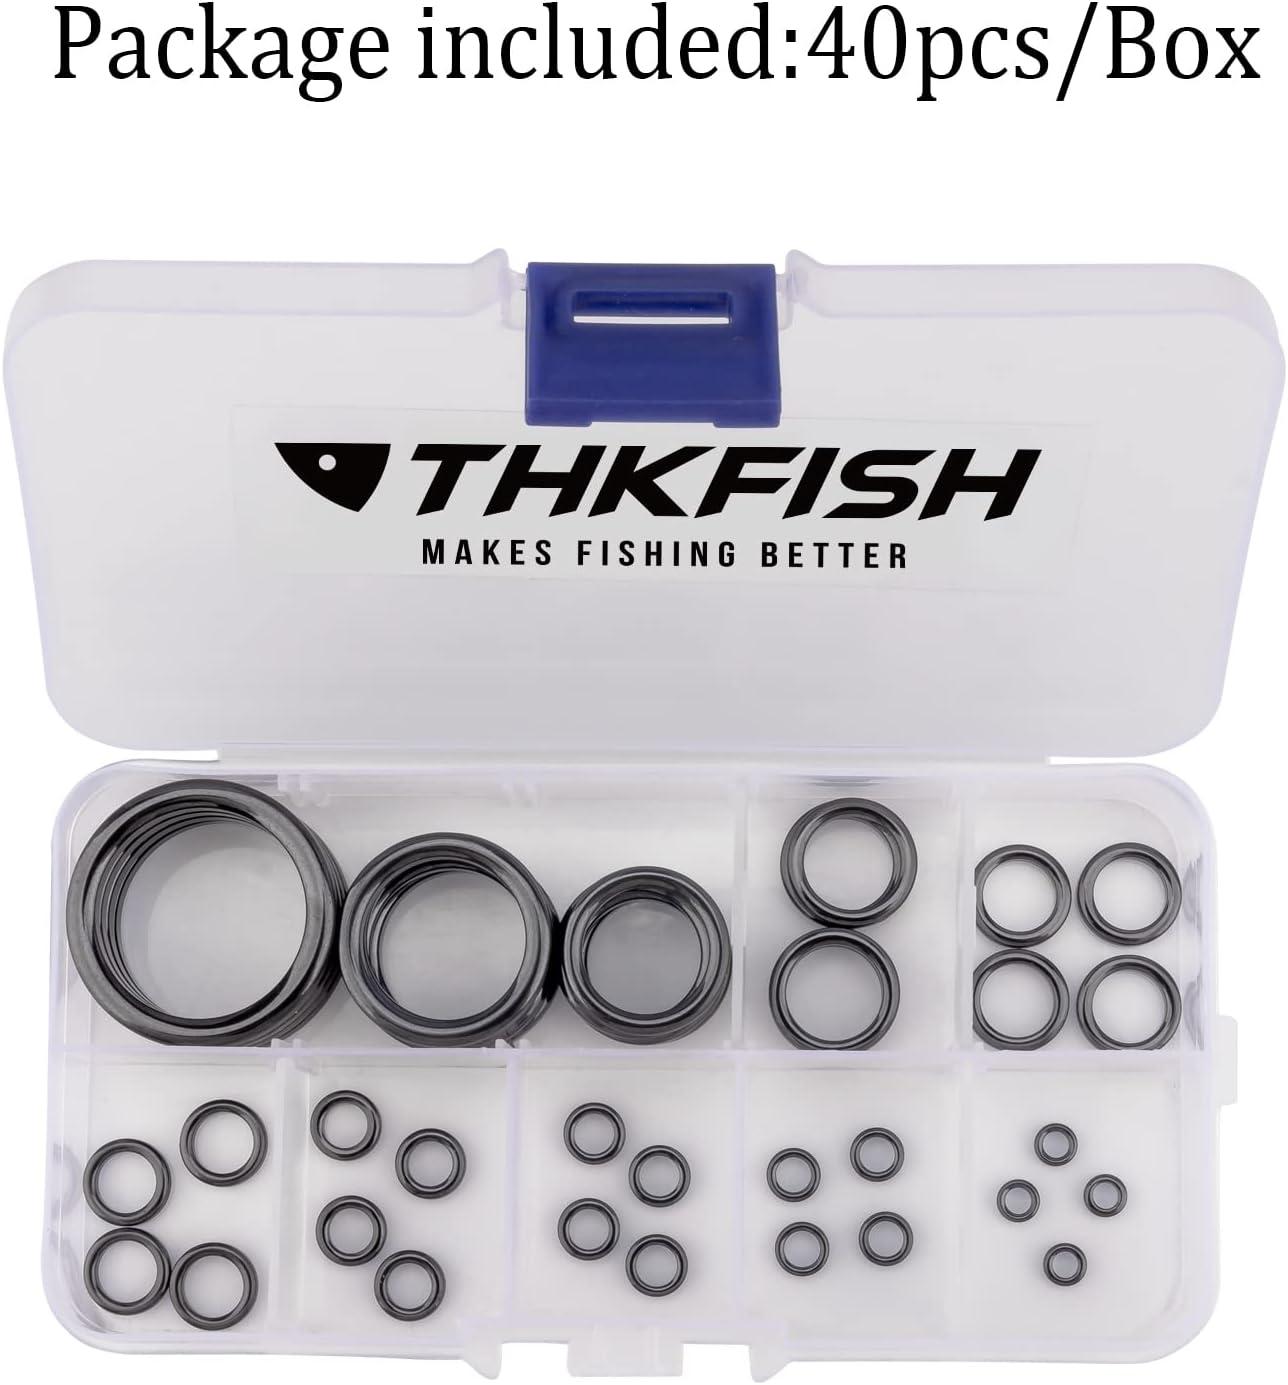 THKFISH Fishing Rod Guides Fishing Rod Repair Kit Baitcasting Rod Guides  Ceramics Stainless Steel Carbon Guide Repair Black/Burnished Silver